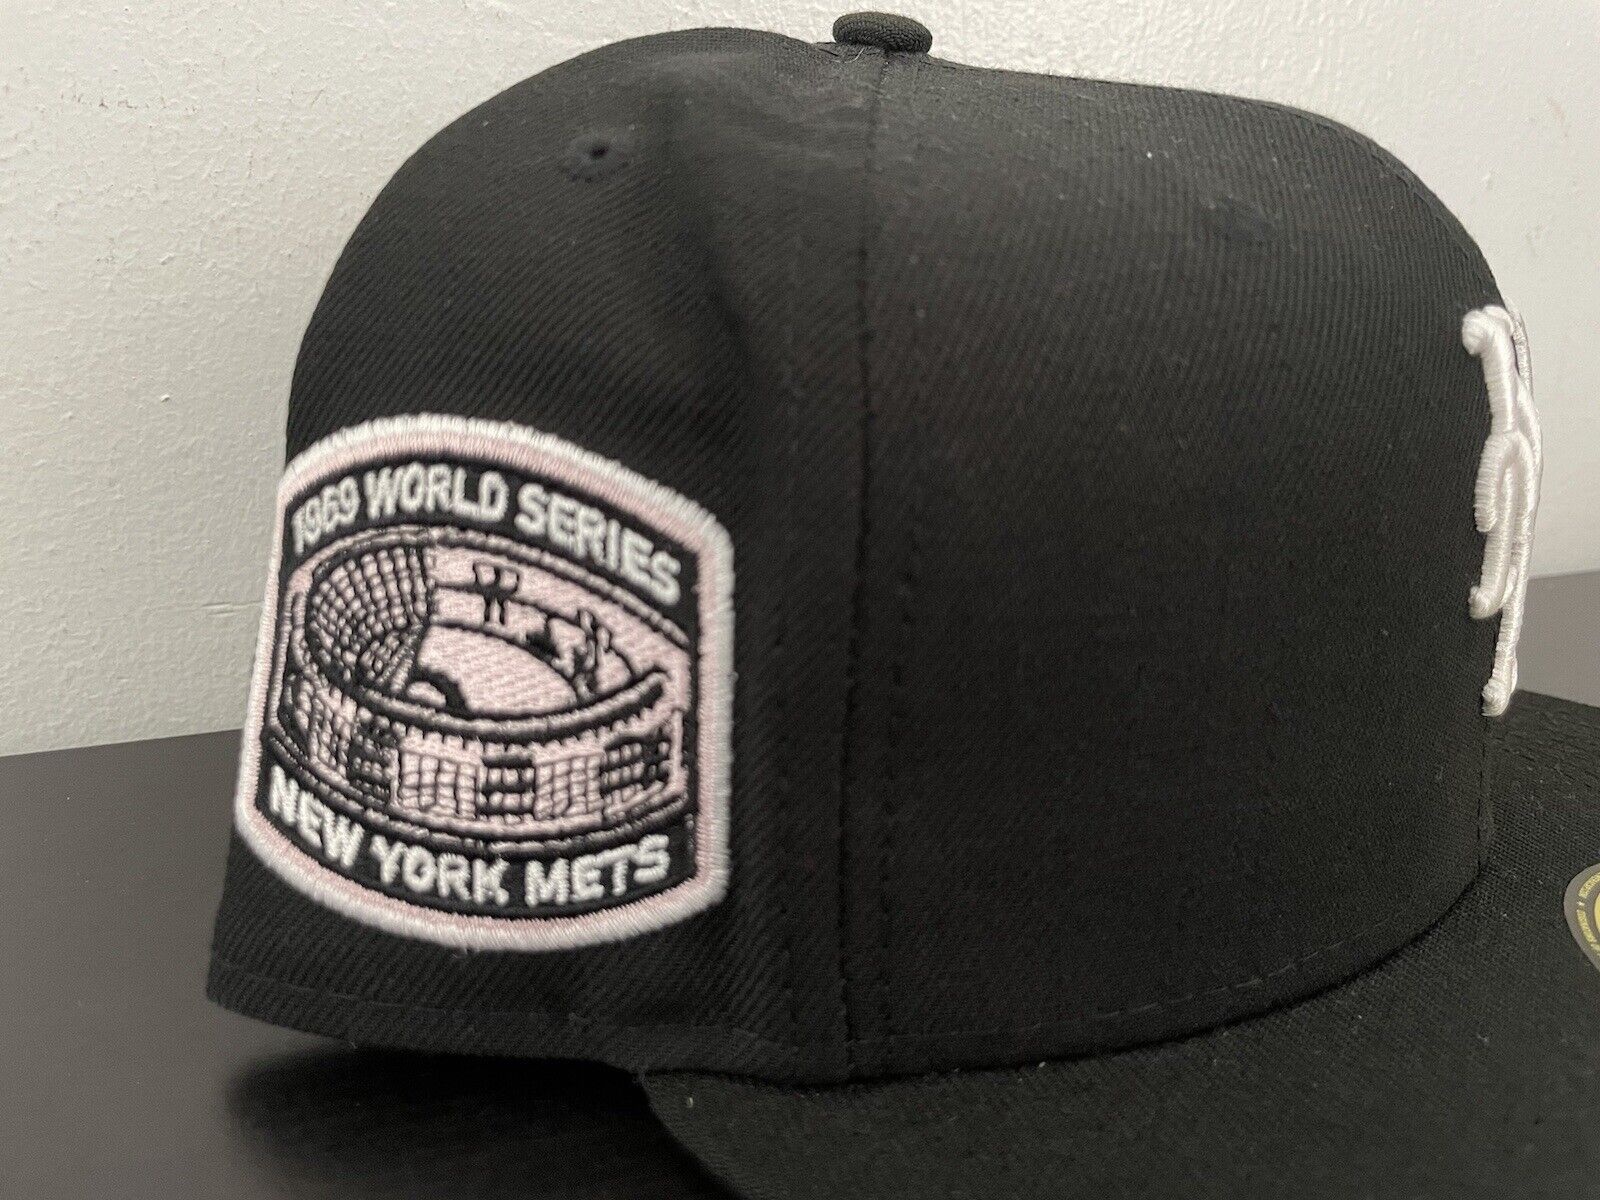 New Era 59Fifty New York Mets Fitted Cap 1969 World Series Men’s Size 7 3/4